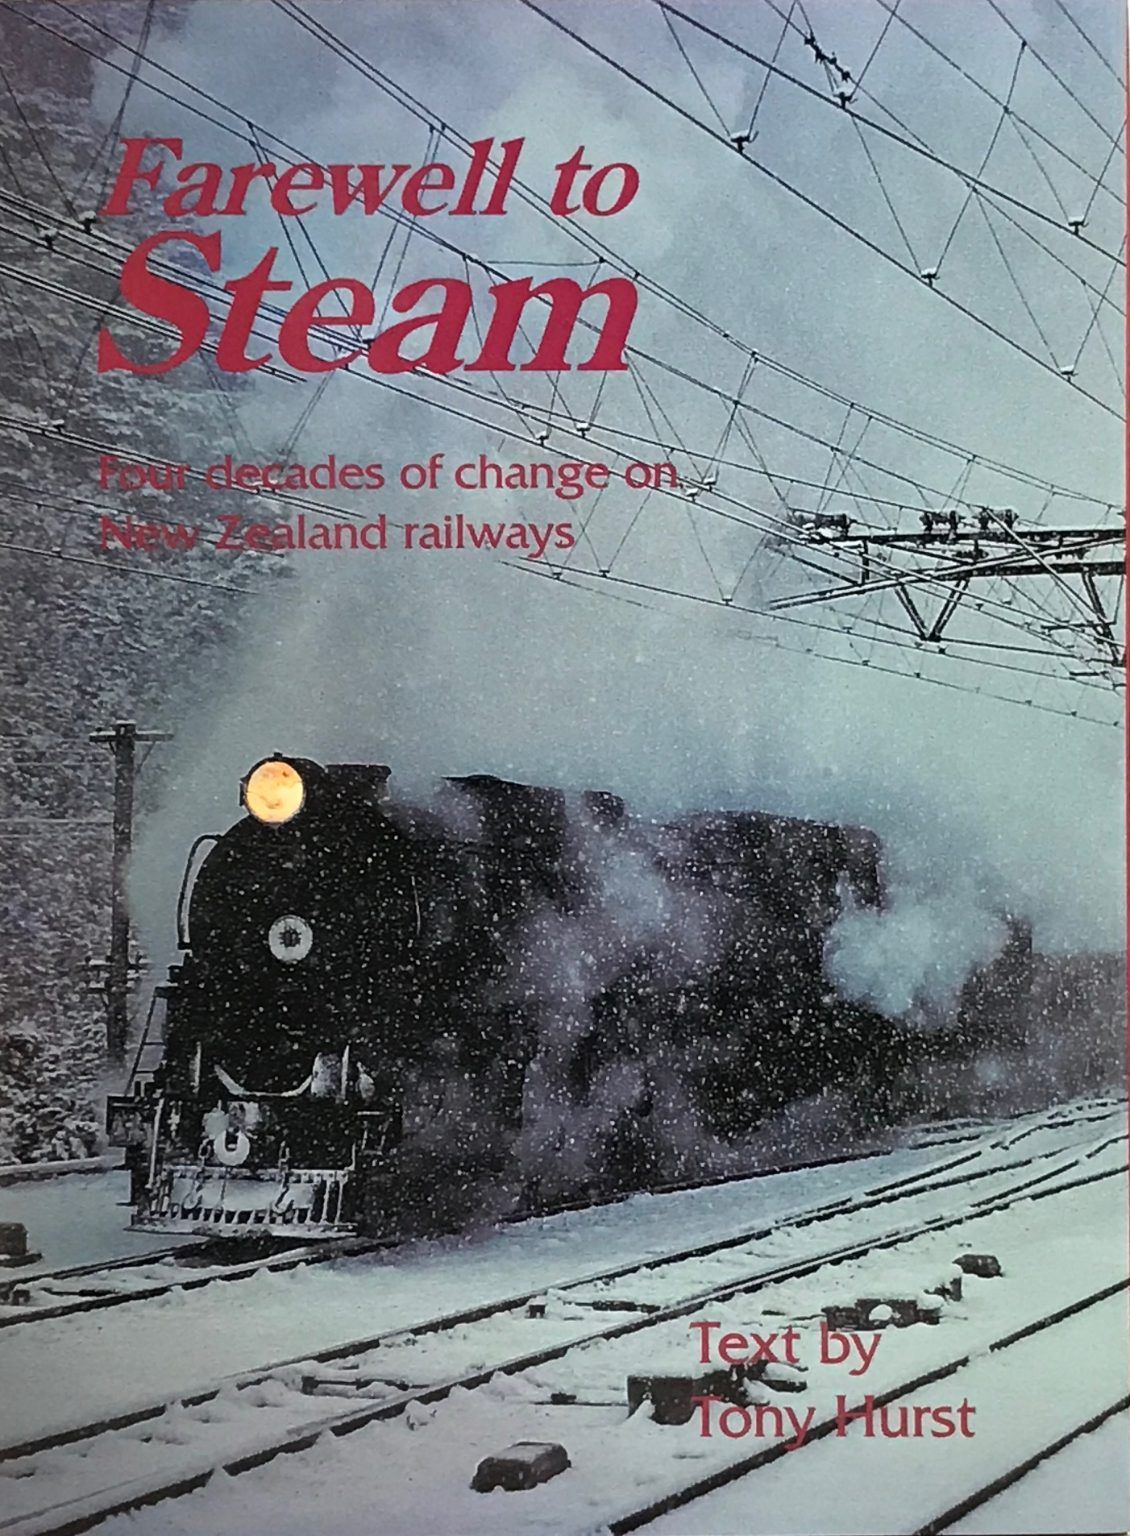 FAREWELL TO STEAM: Four Decades of Change on New Zealand Railways